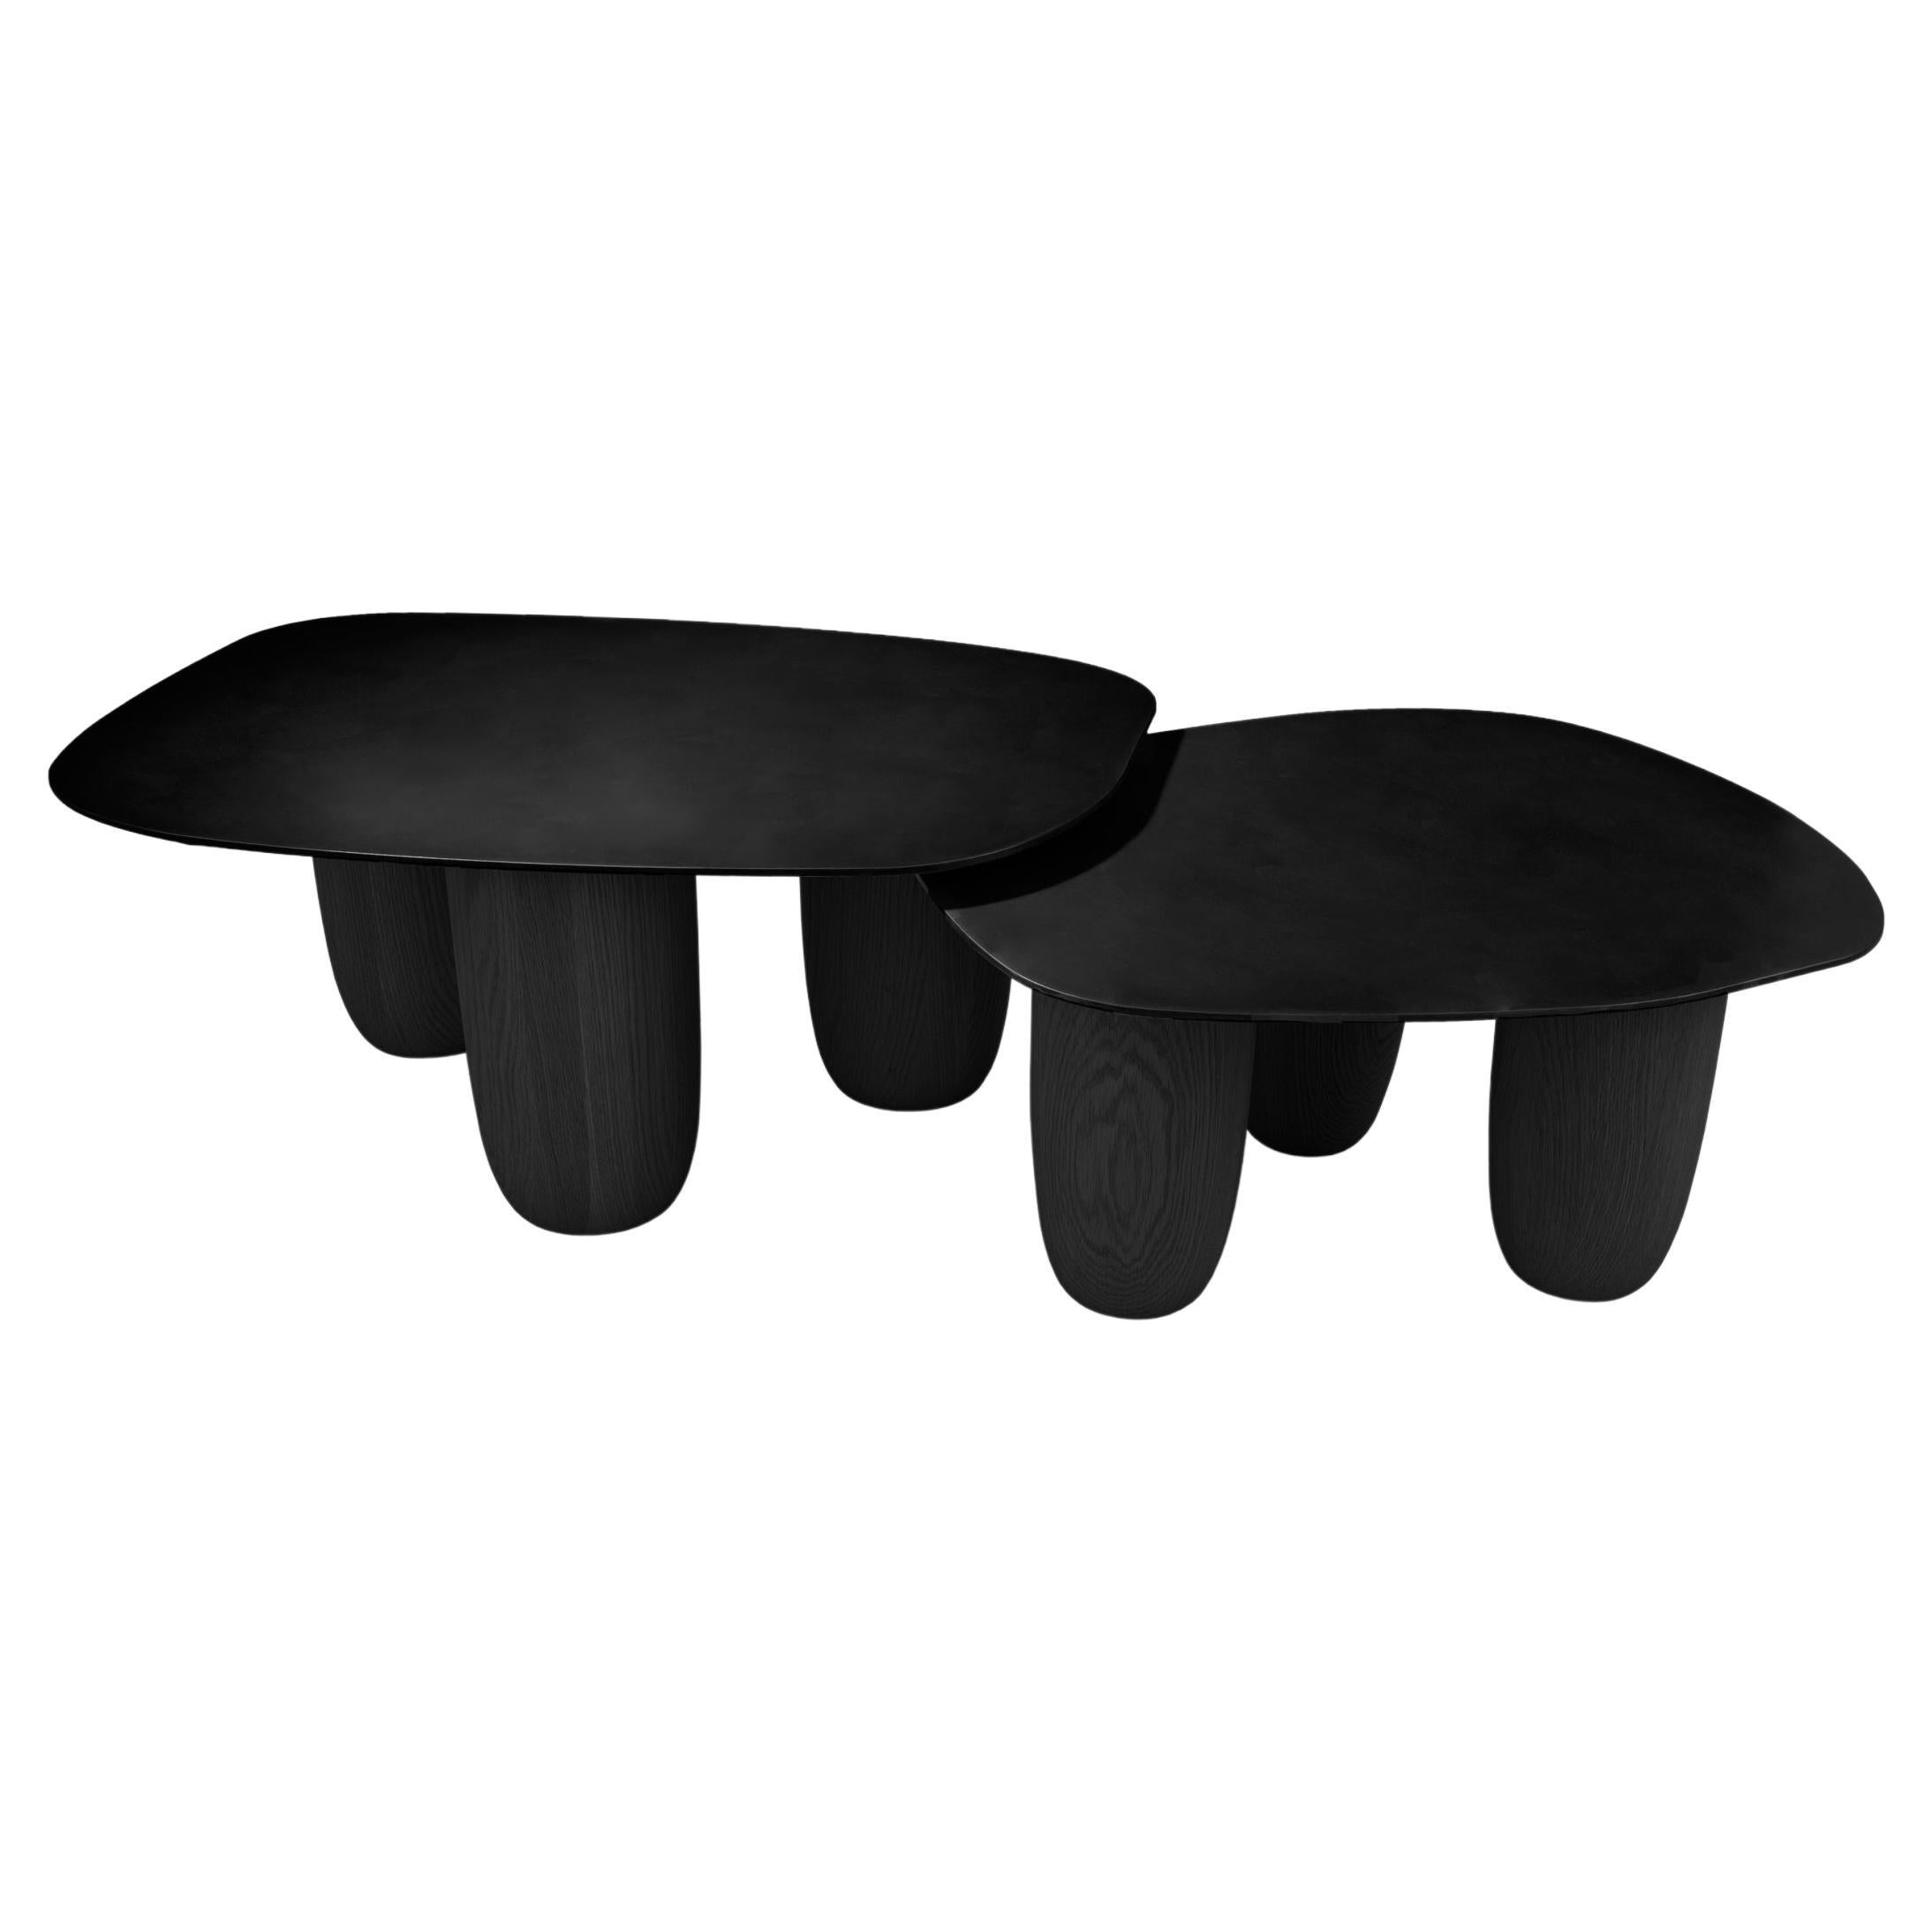 Contemporary Low Tables in Matte Black Steel and Oak Legs by Vivian Carbonell For Sale